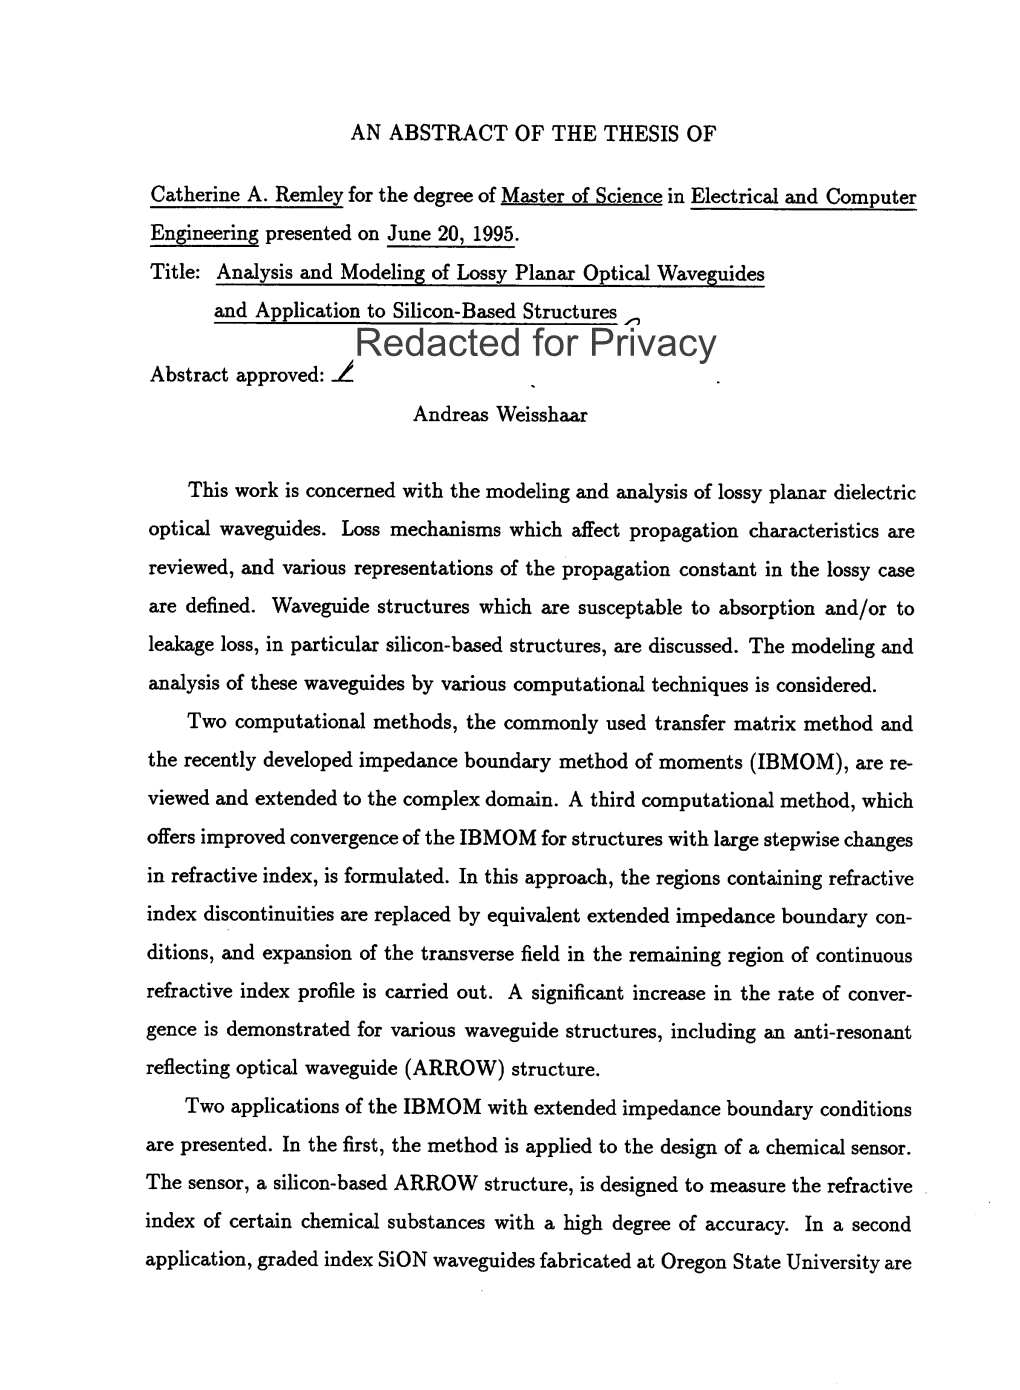 Analysis and Modeling of Lossy Planar Optical Waveguides and Application to Silicon-Based Structures Redacted for Privacy Abstract Approved